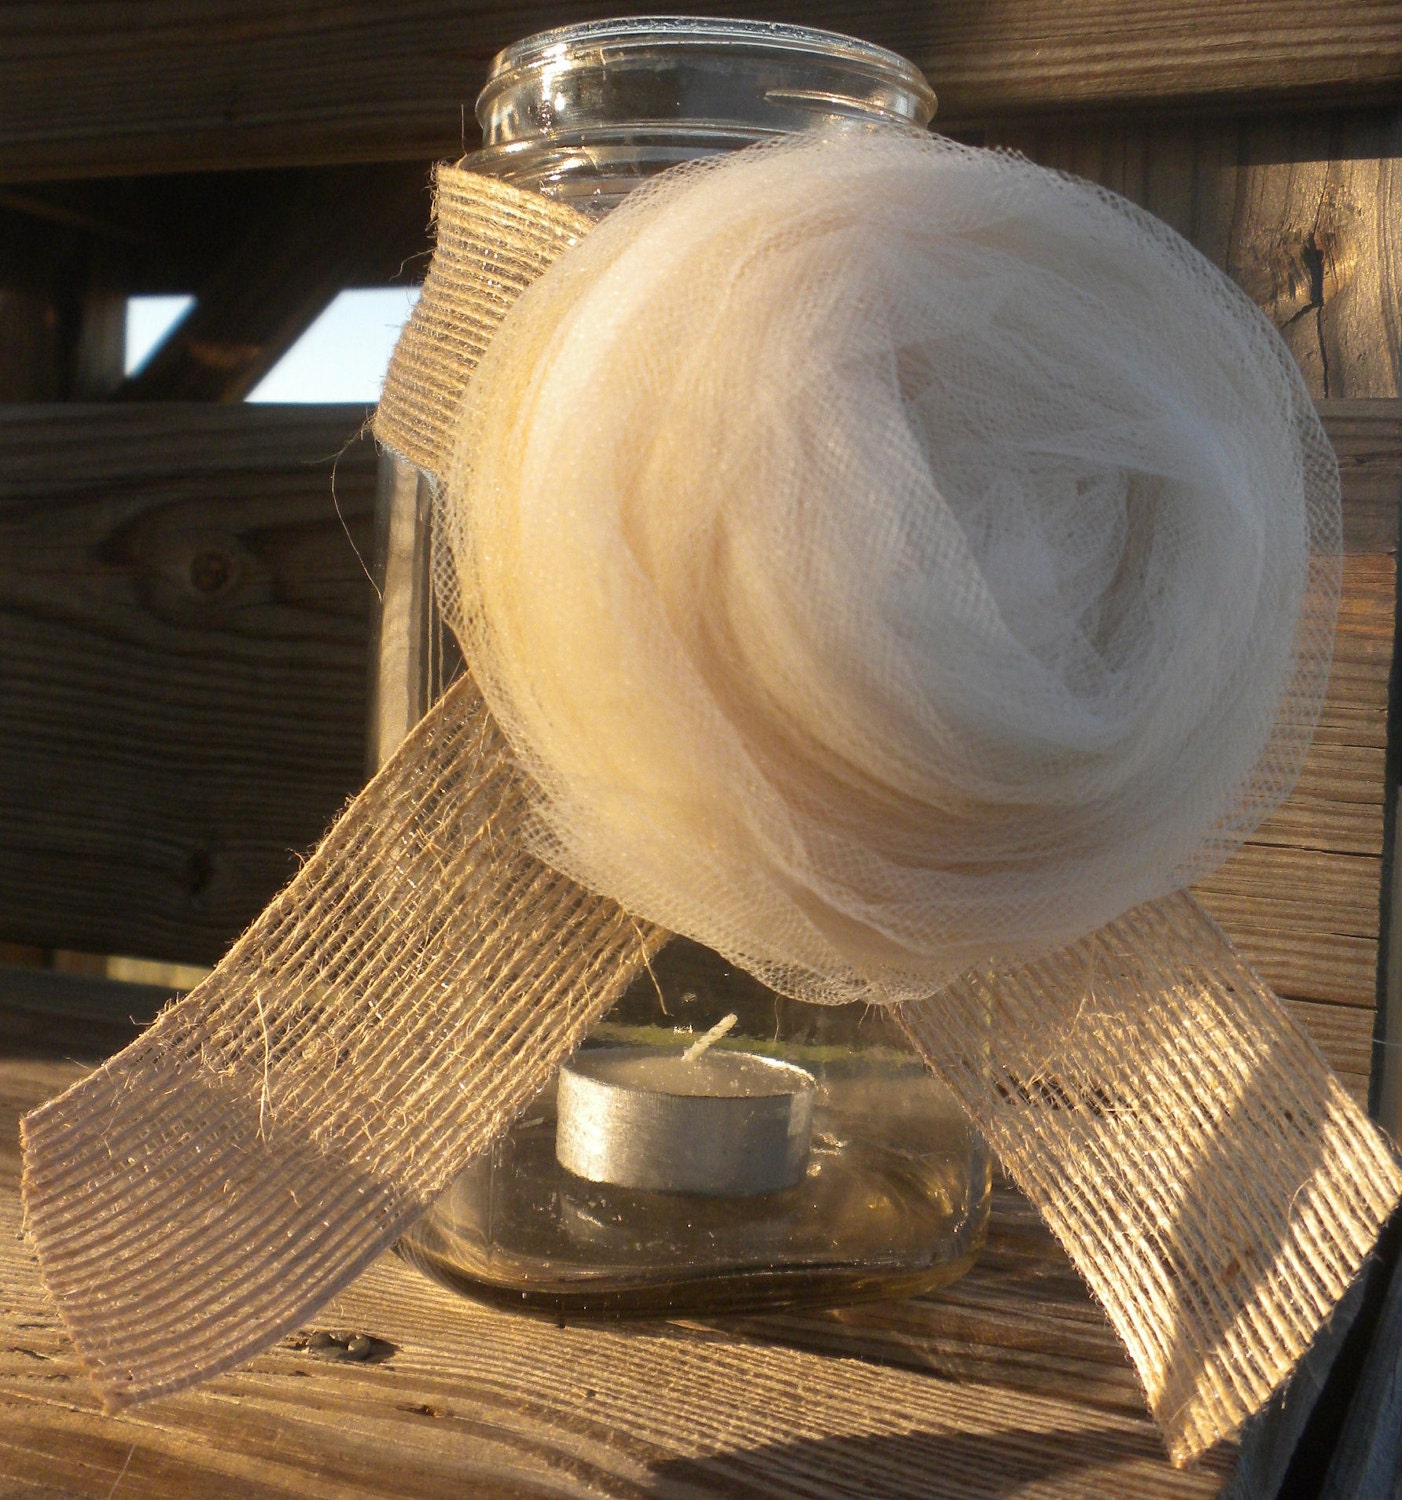 Rustic and Country Chic Vintage Inspired Tulle Rose with Burlap Accent Wedding Decor